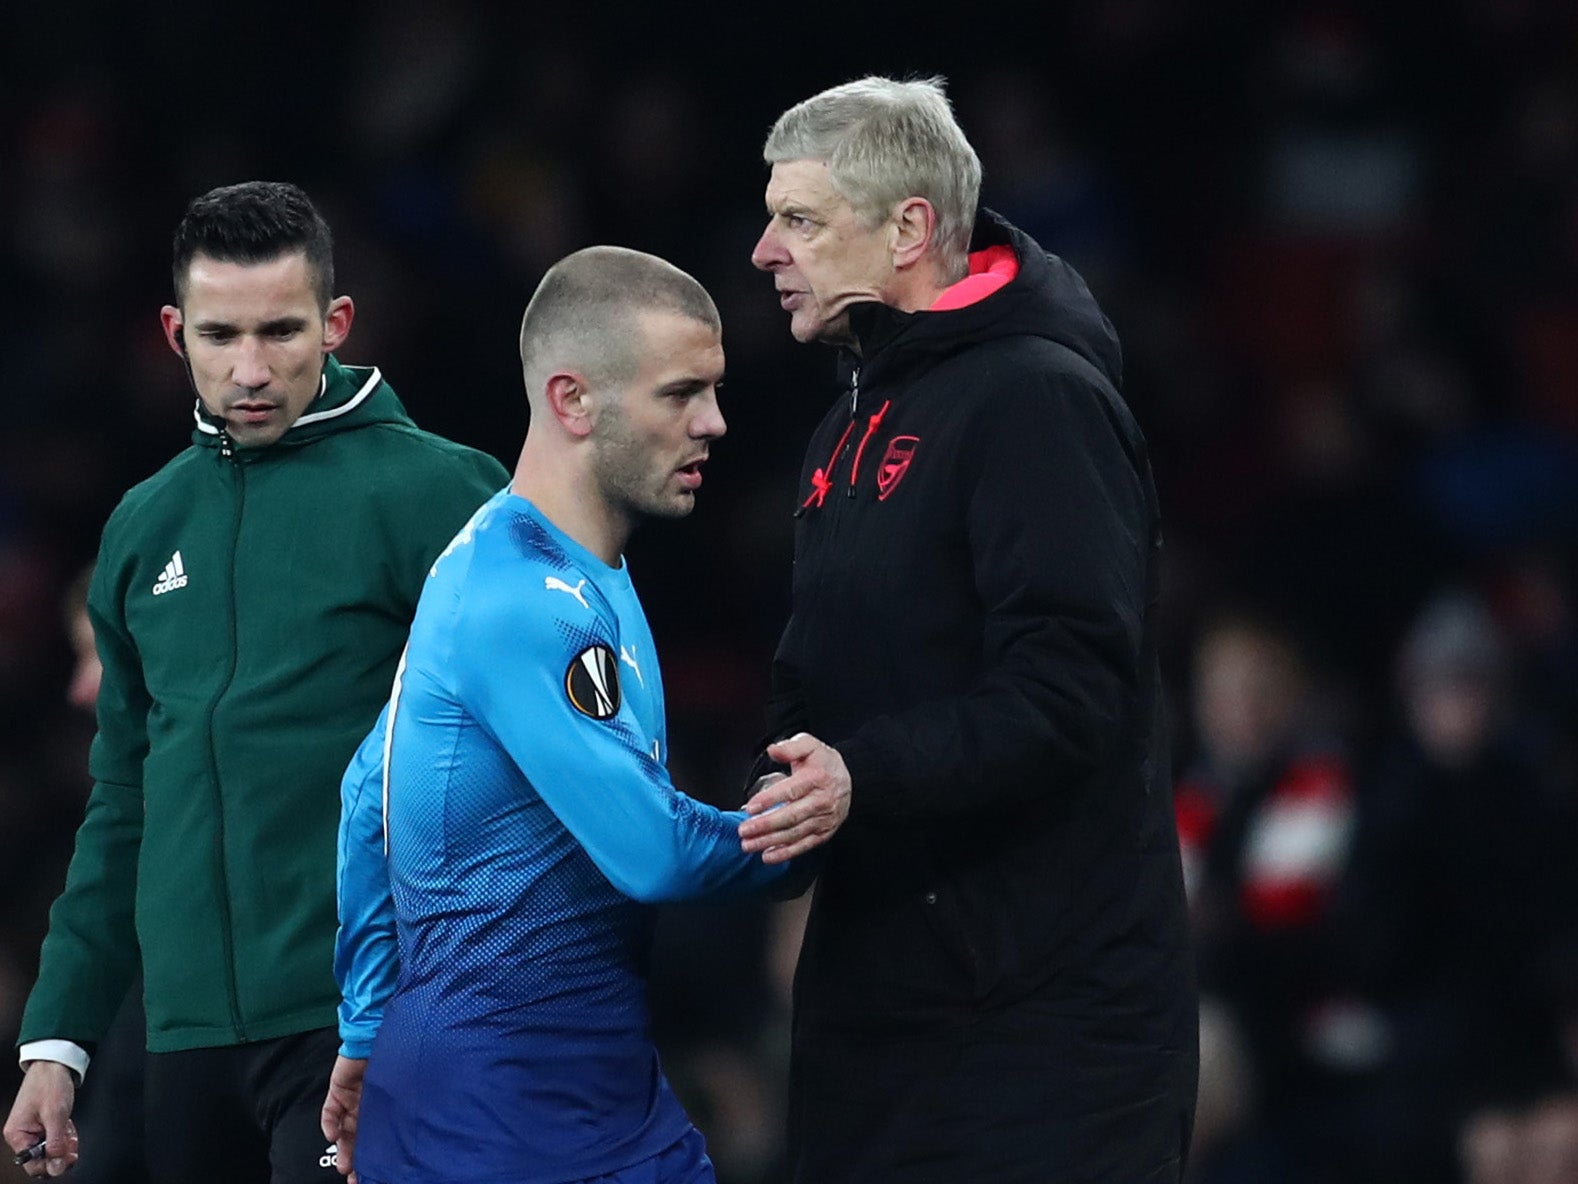 Jack Wilshere is yet to sign a new deal at the Emirates